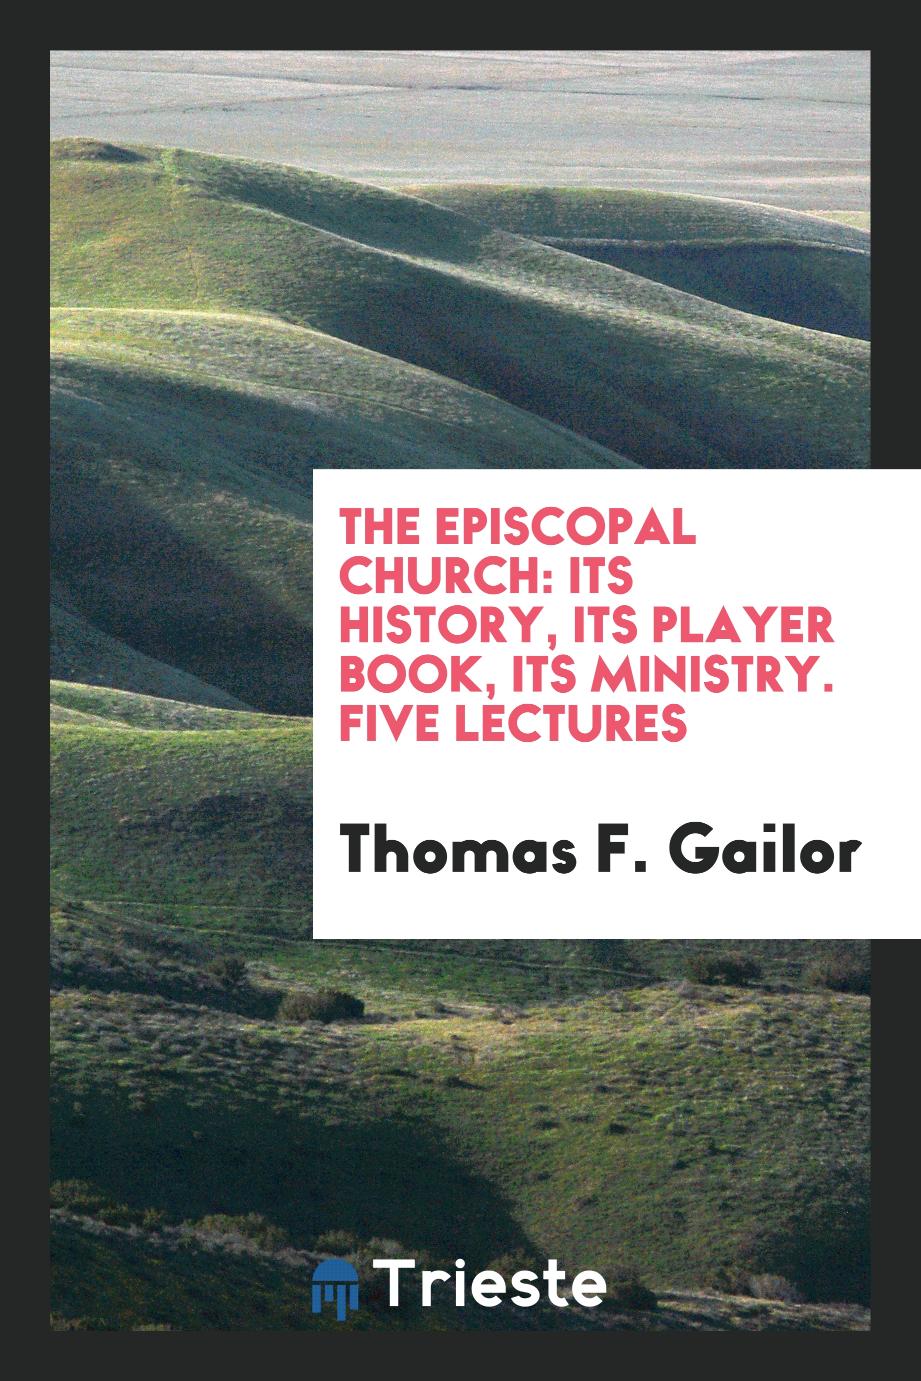 The Episcopal Church: Its History, Its Player Book, Its Ministry. Five Lectures